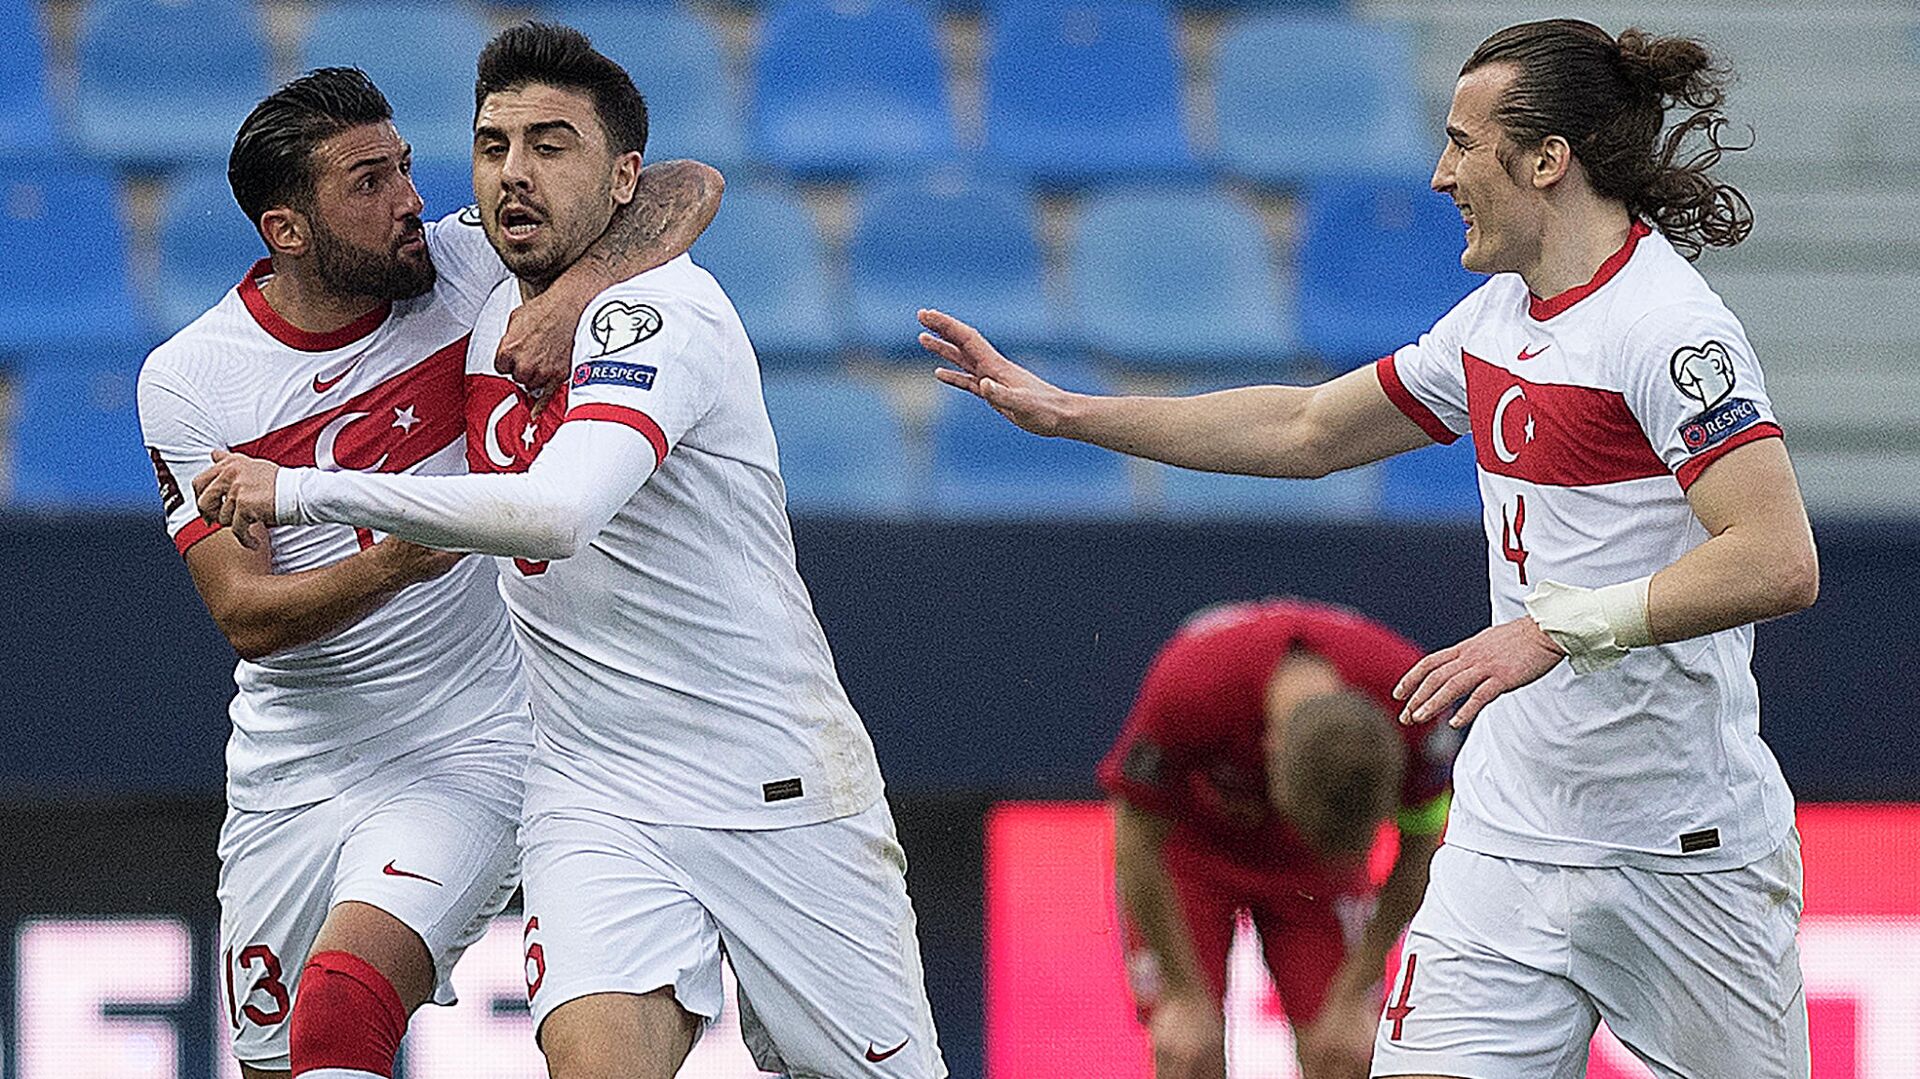 Turkey's midfielder Ozan Tufan (C) celebrates with defenders Umut Meras (L) and Caglar Soyuncu after scoring a goal during the FIFA World Cup Qatar 2022 qualification football match between Norway and Turkey at La Rosaleda stadium in Malaga on March 27, 2021. (Photo by JORGE GUERRERO / AFP) - РИА Новости, 1920, 27.03.2021